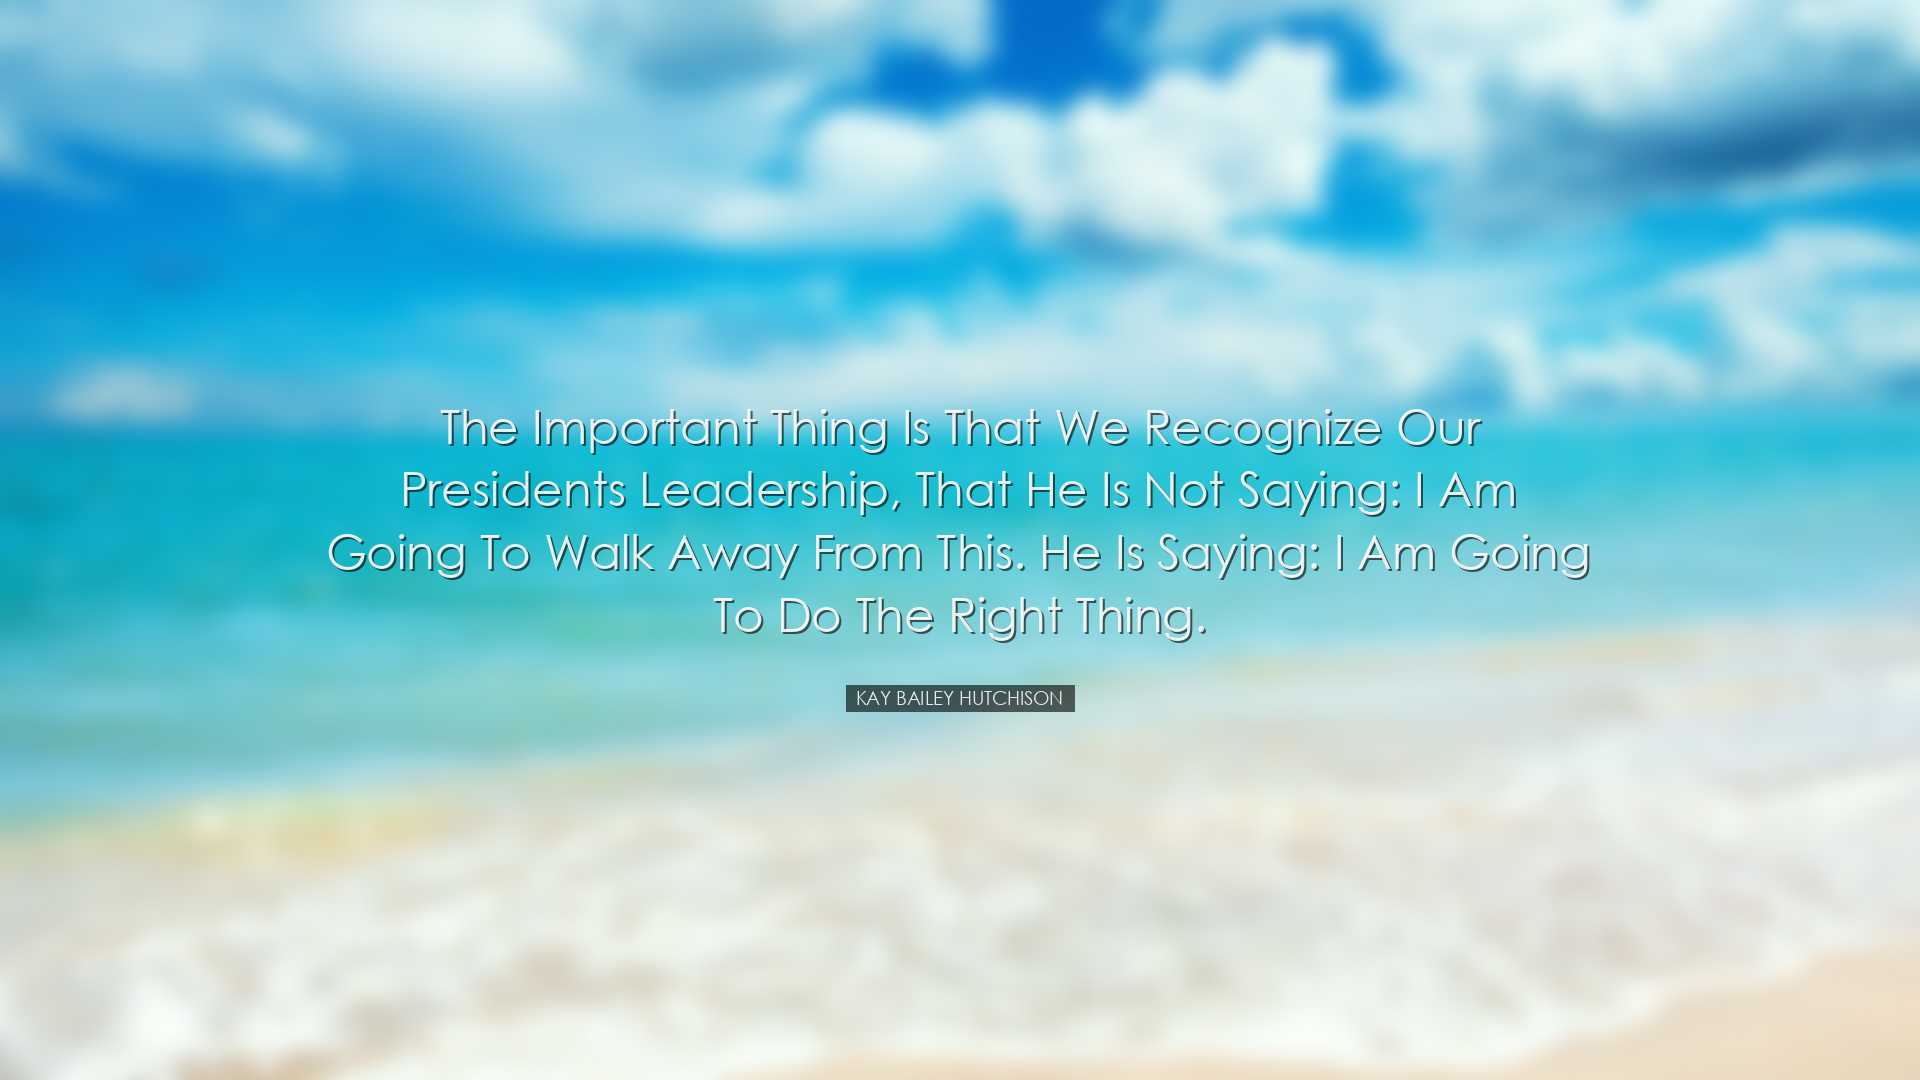 The important thing is that we recognize our Presidents leadership